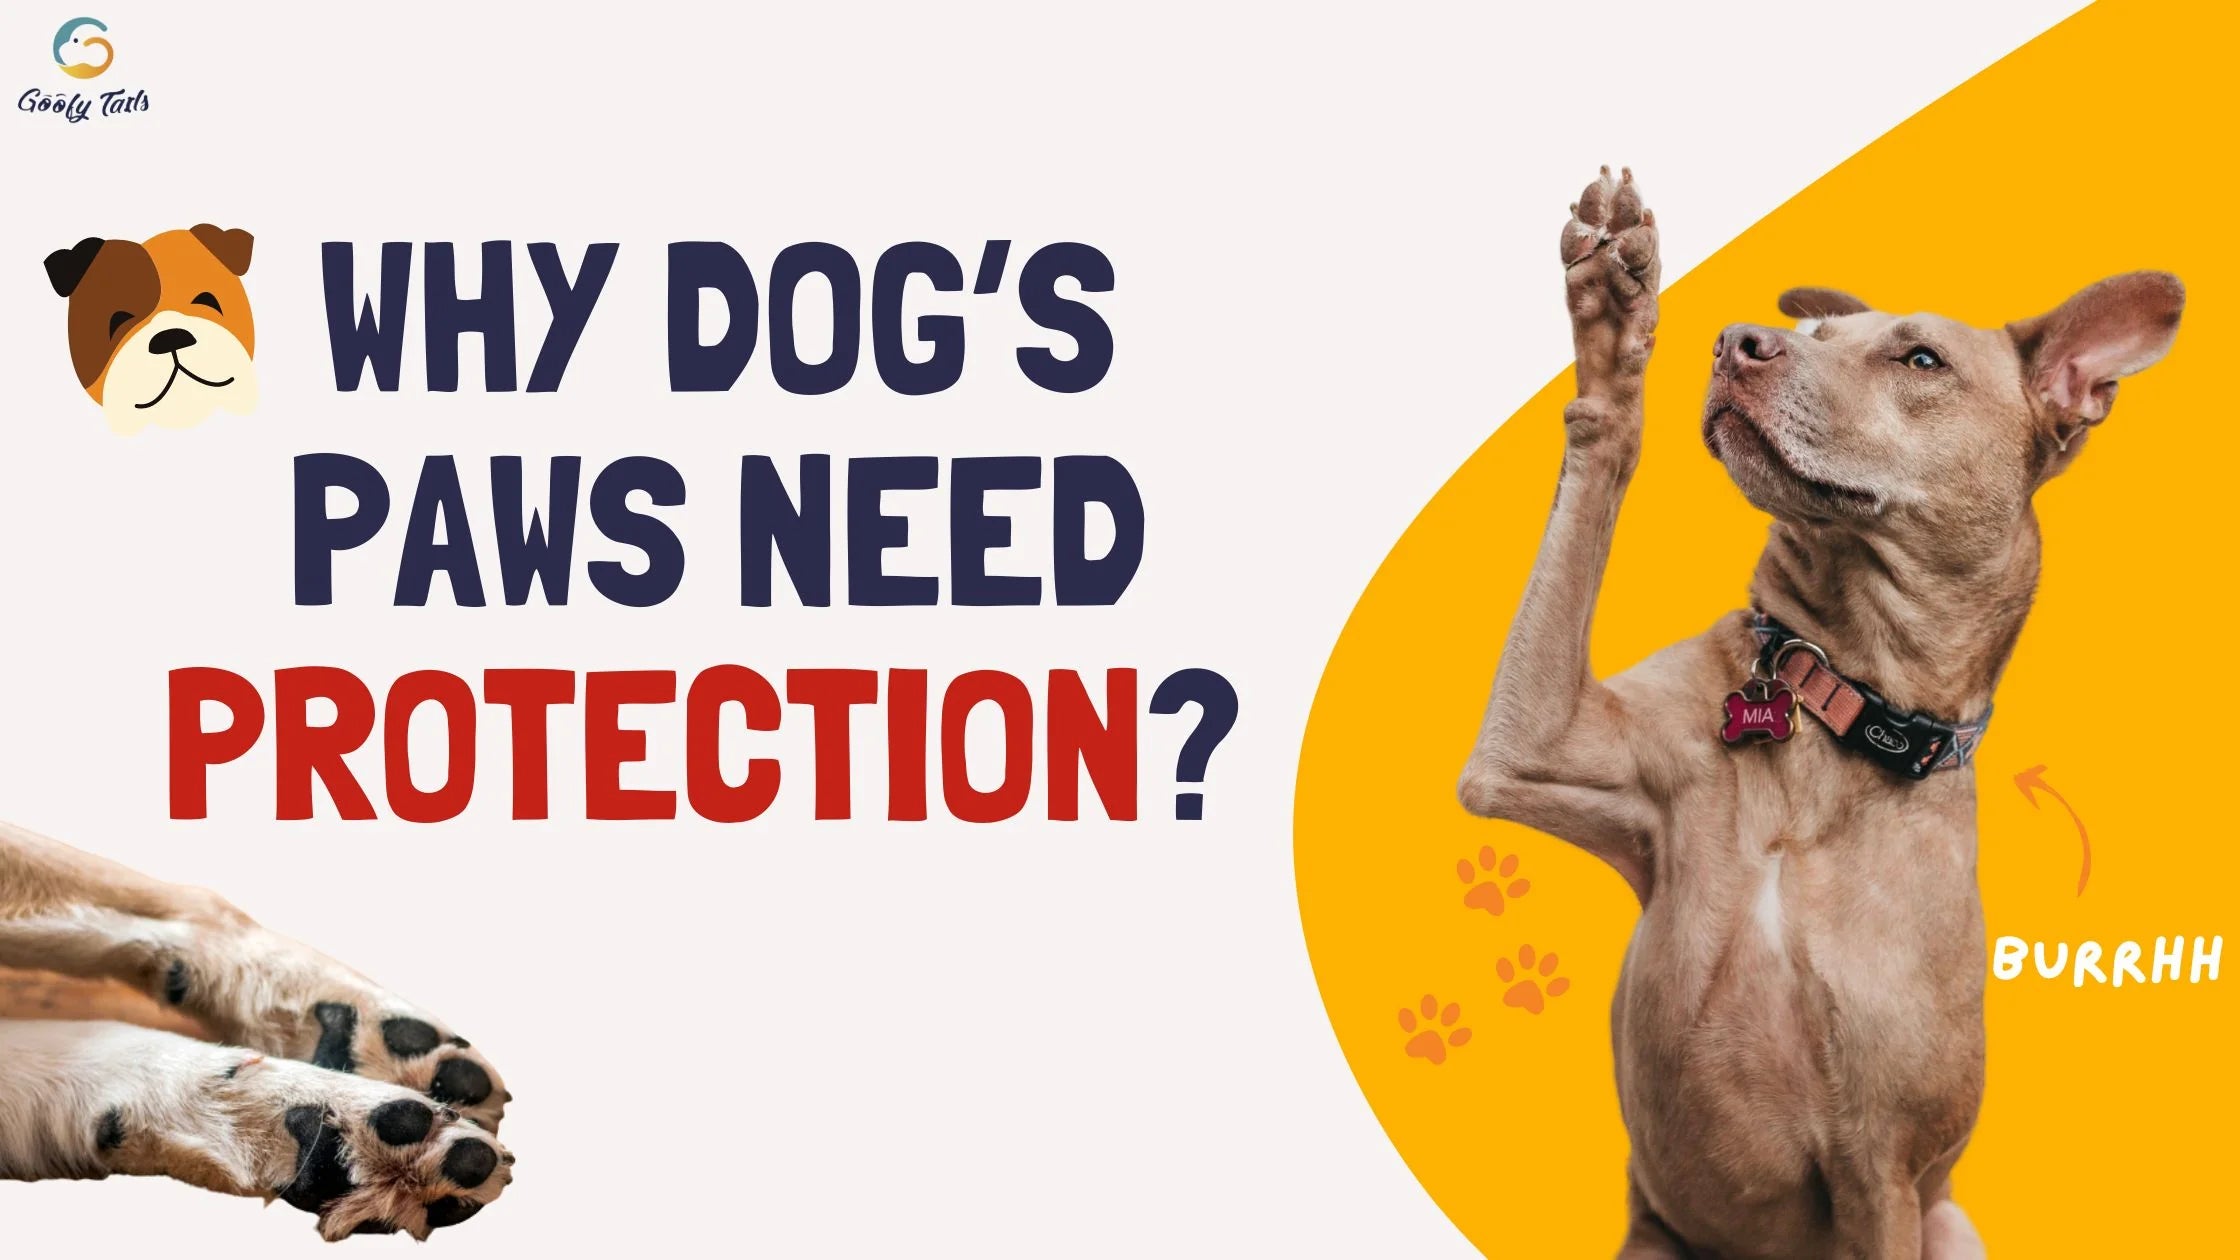 Why Dog’s Paws need protection?